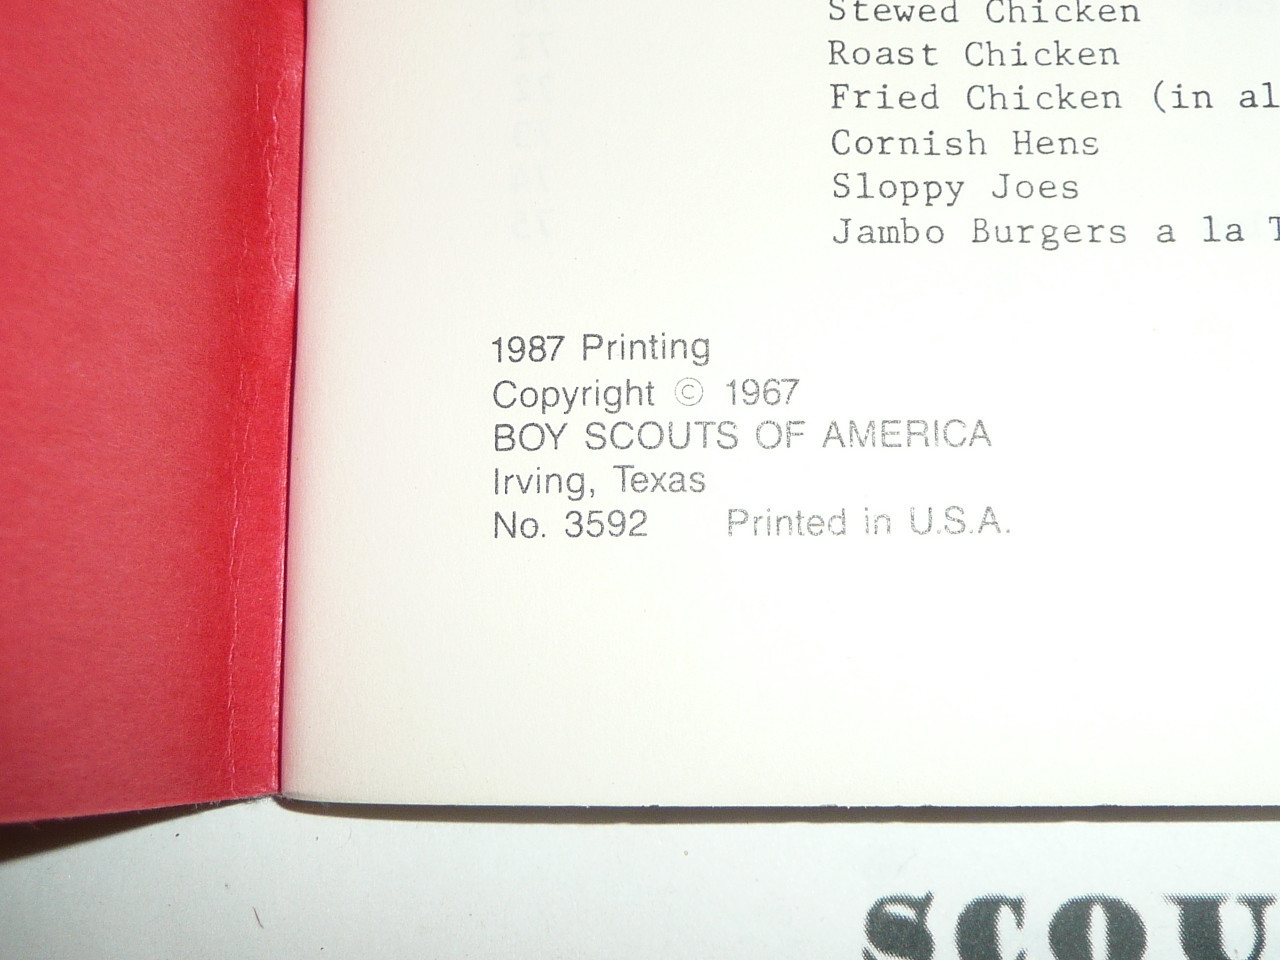 1967 Camp Cookery For Small Groups, Boy Scouts of America